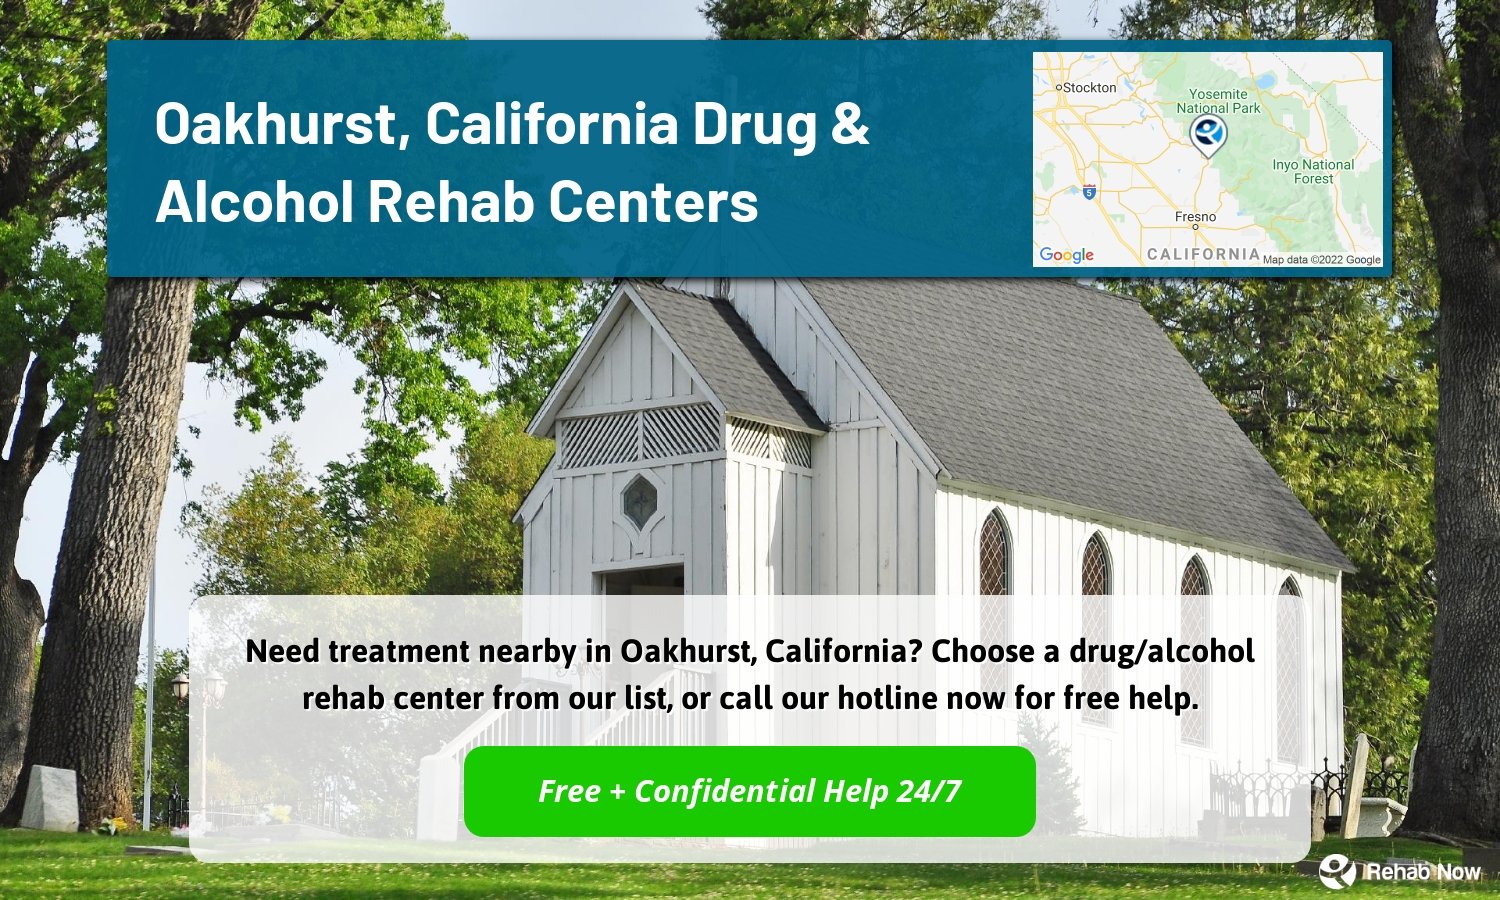 Need treatment nearby in Oakhurst, California? Choose a drug/alcohol rehab center from our list, or call our hotline now for free help.